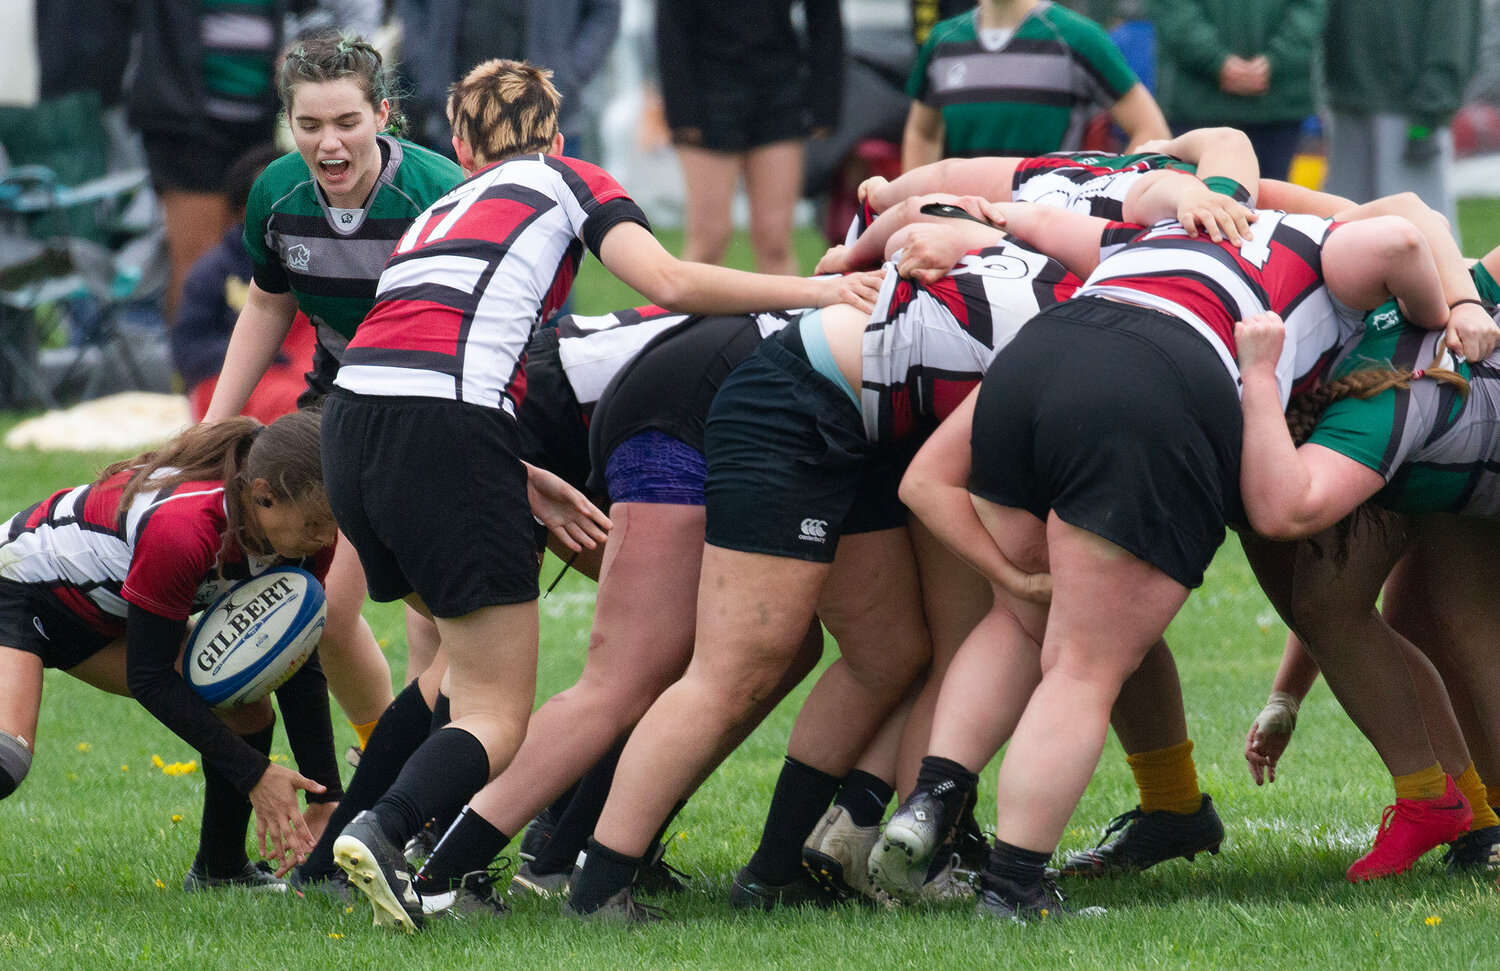 UVM scrum half Emmye “Pyro” Harris screams out to her teammates as the ball falls through the scrum during their match on Saturday.